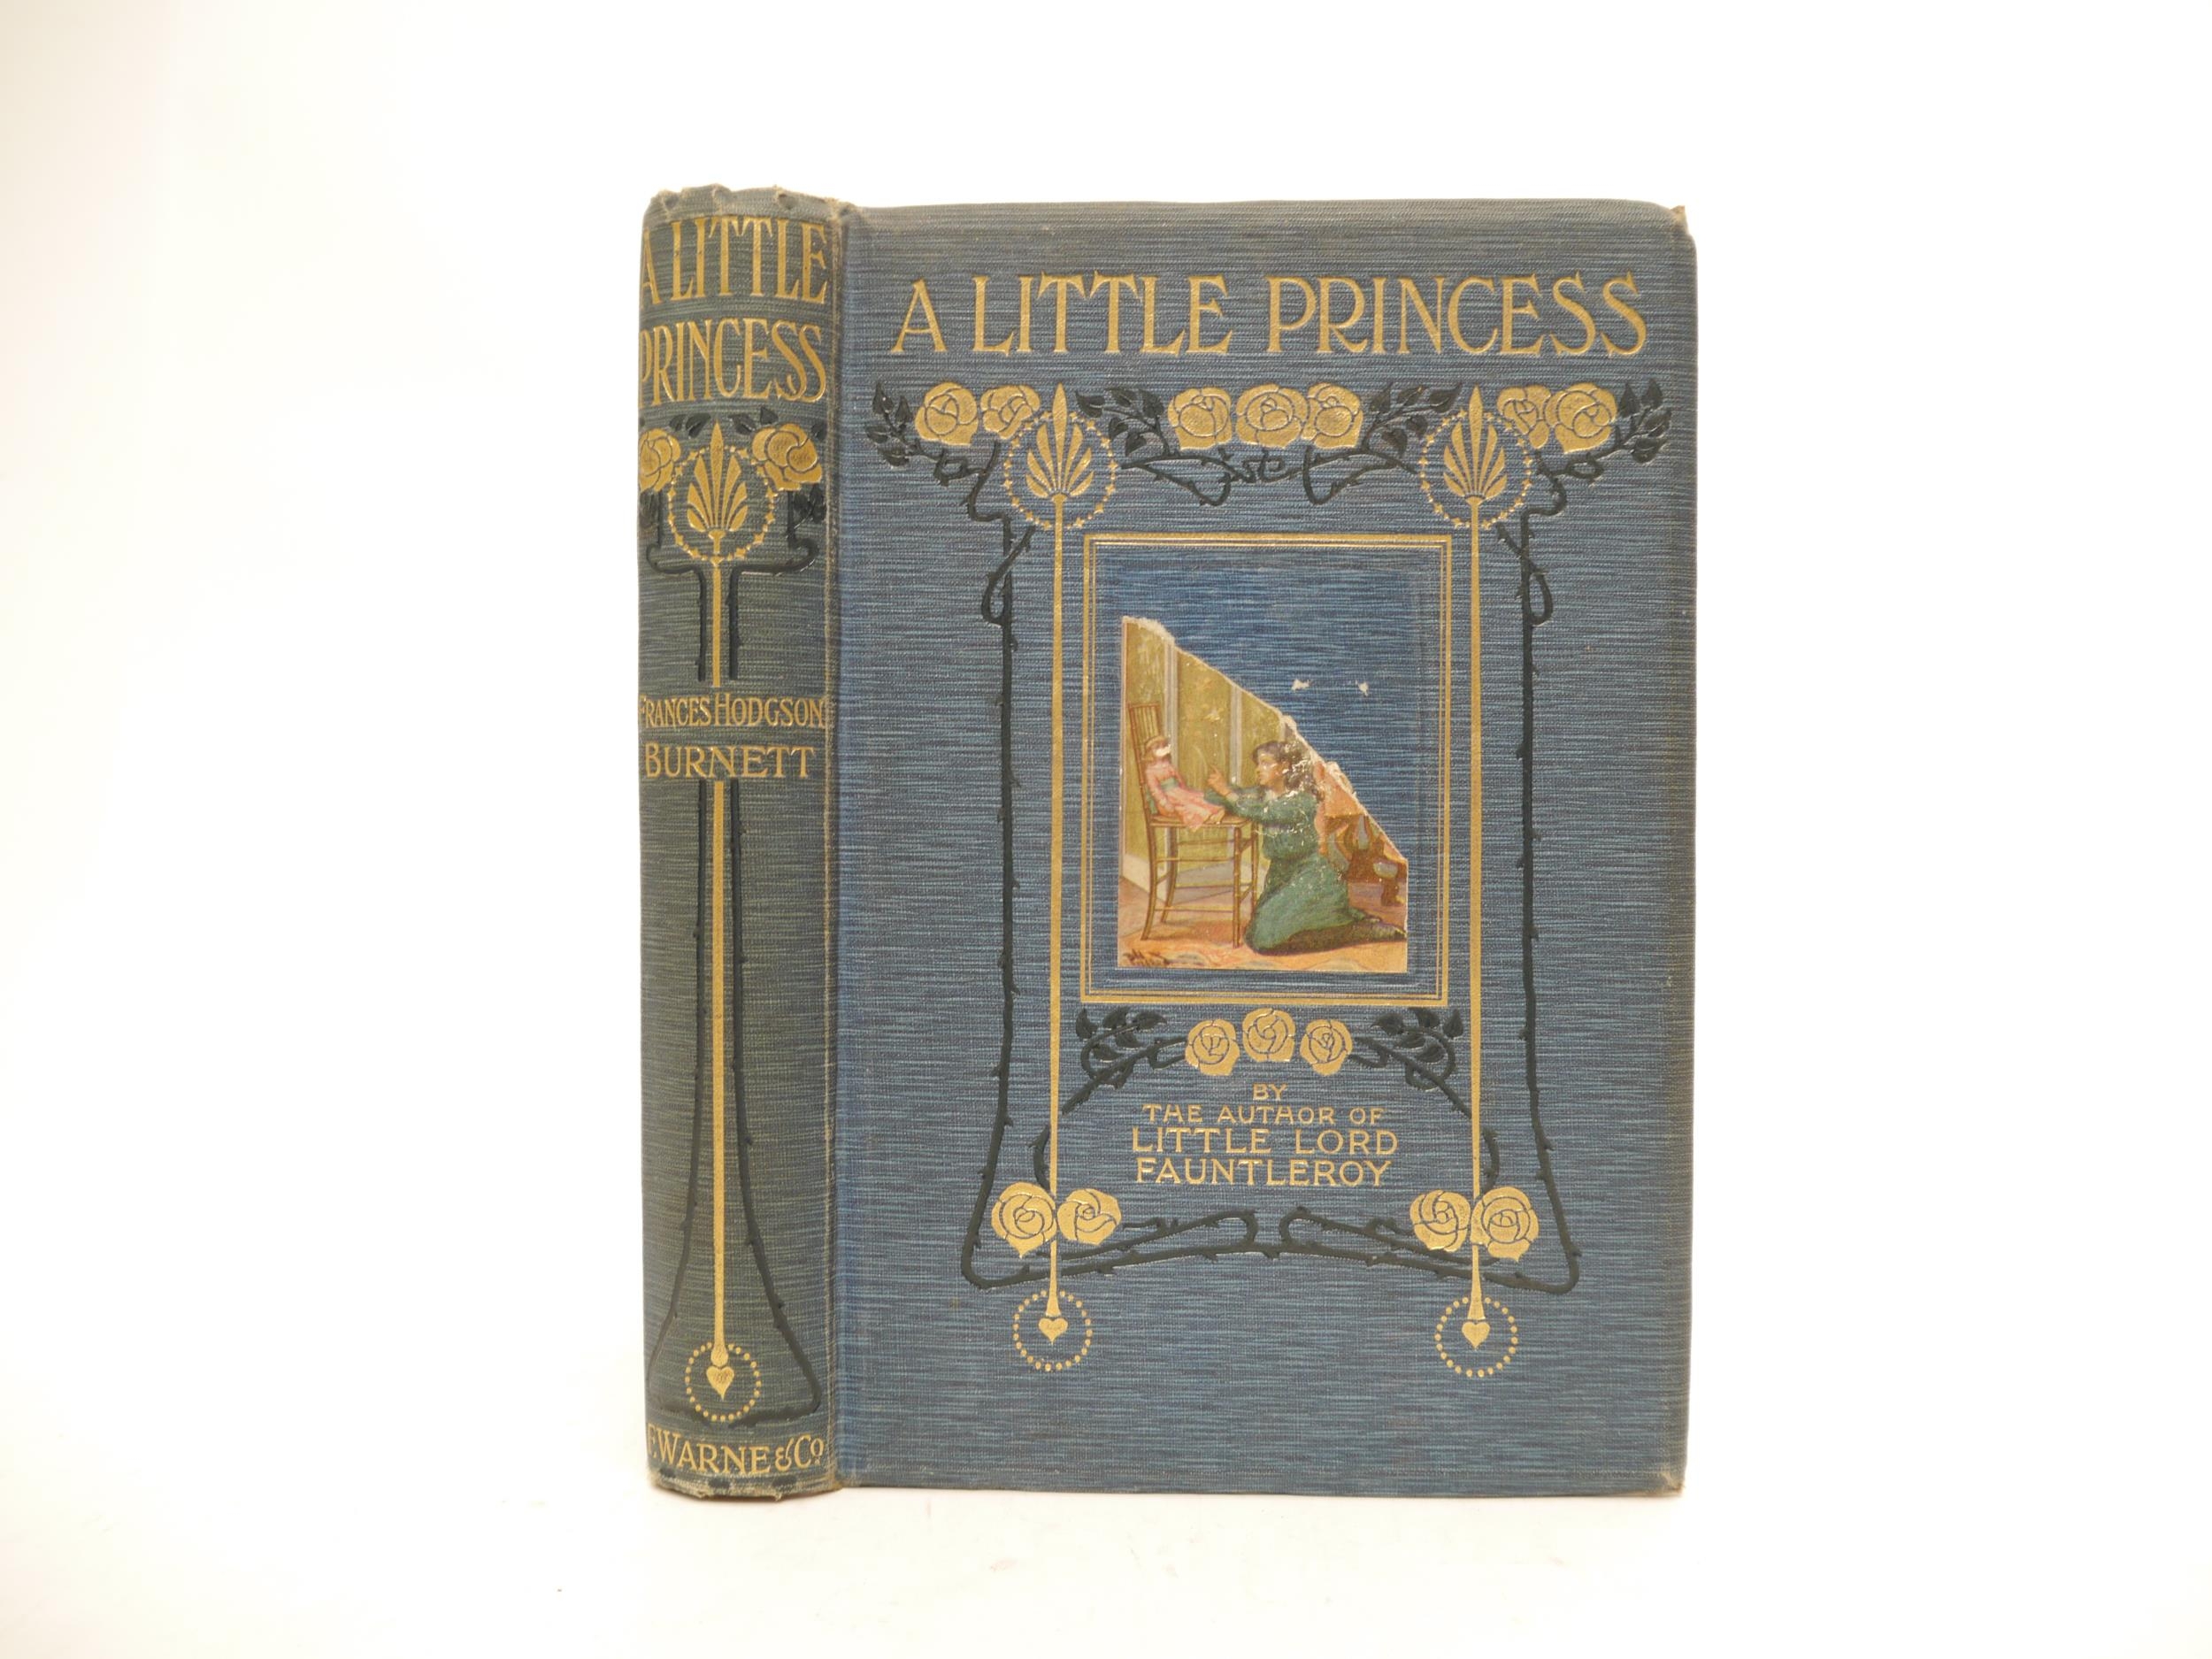 Frances Hodgson Burnett: 'A Little Princess: being the whole story of Sara Crewe, now told for the